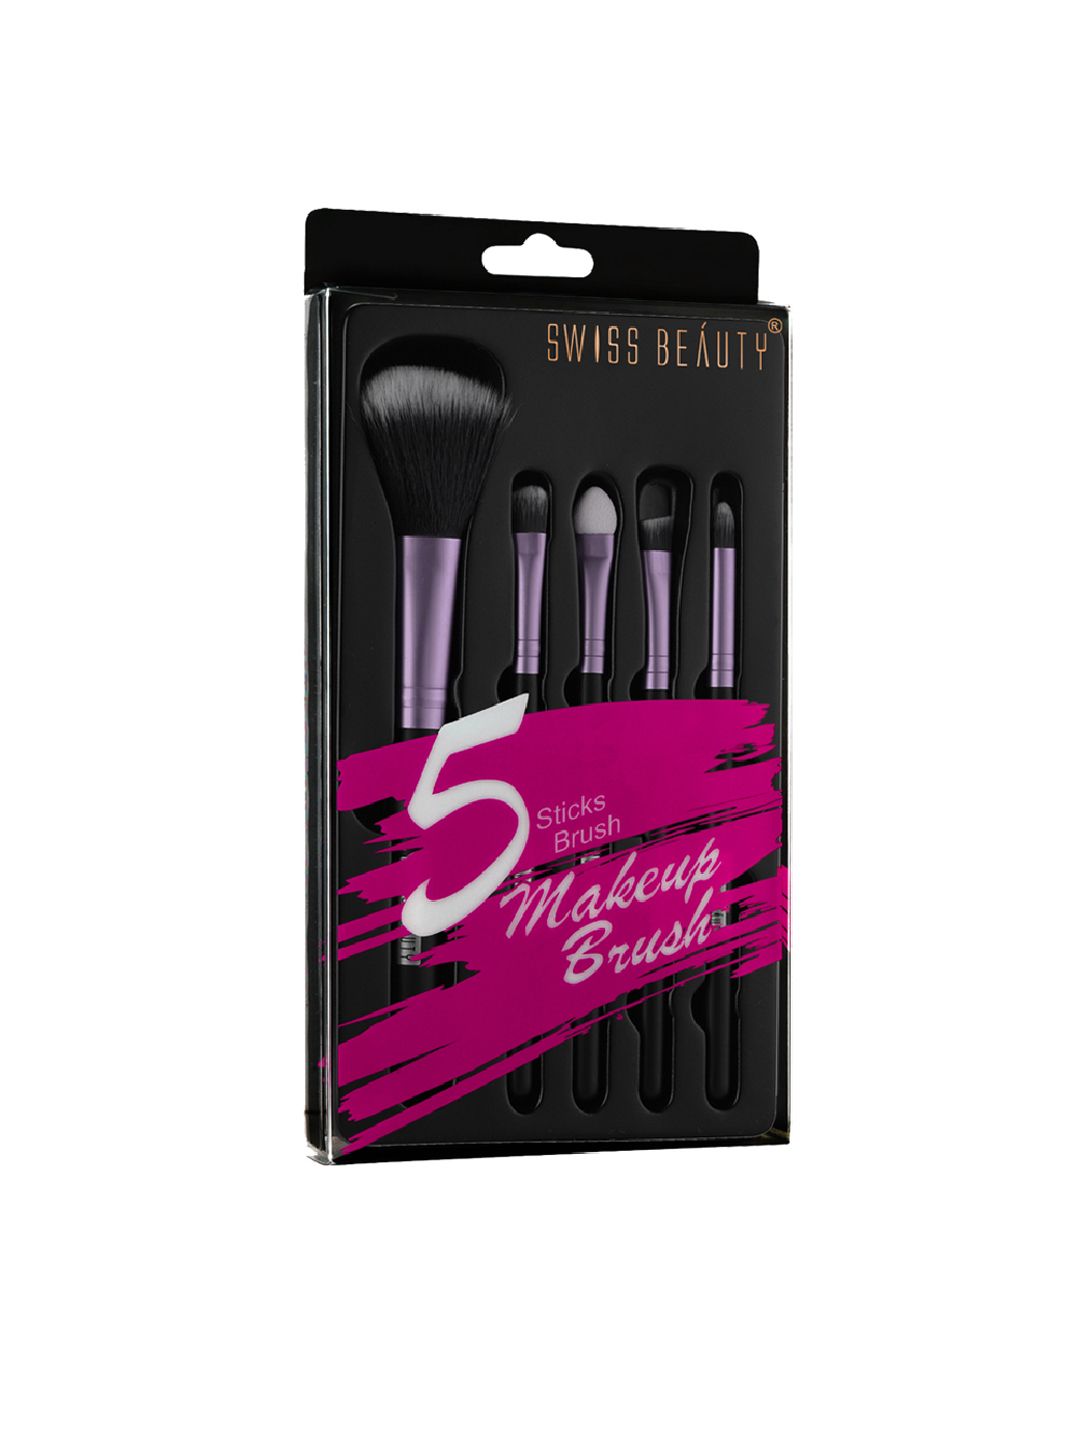 SWISS BEAUTY Set of 5 Makeup Brushes - Purple Price in India